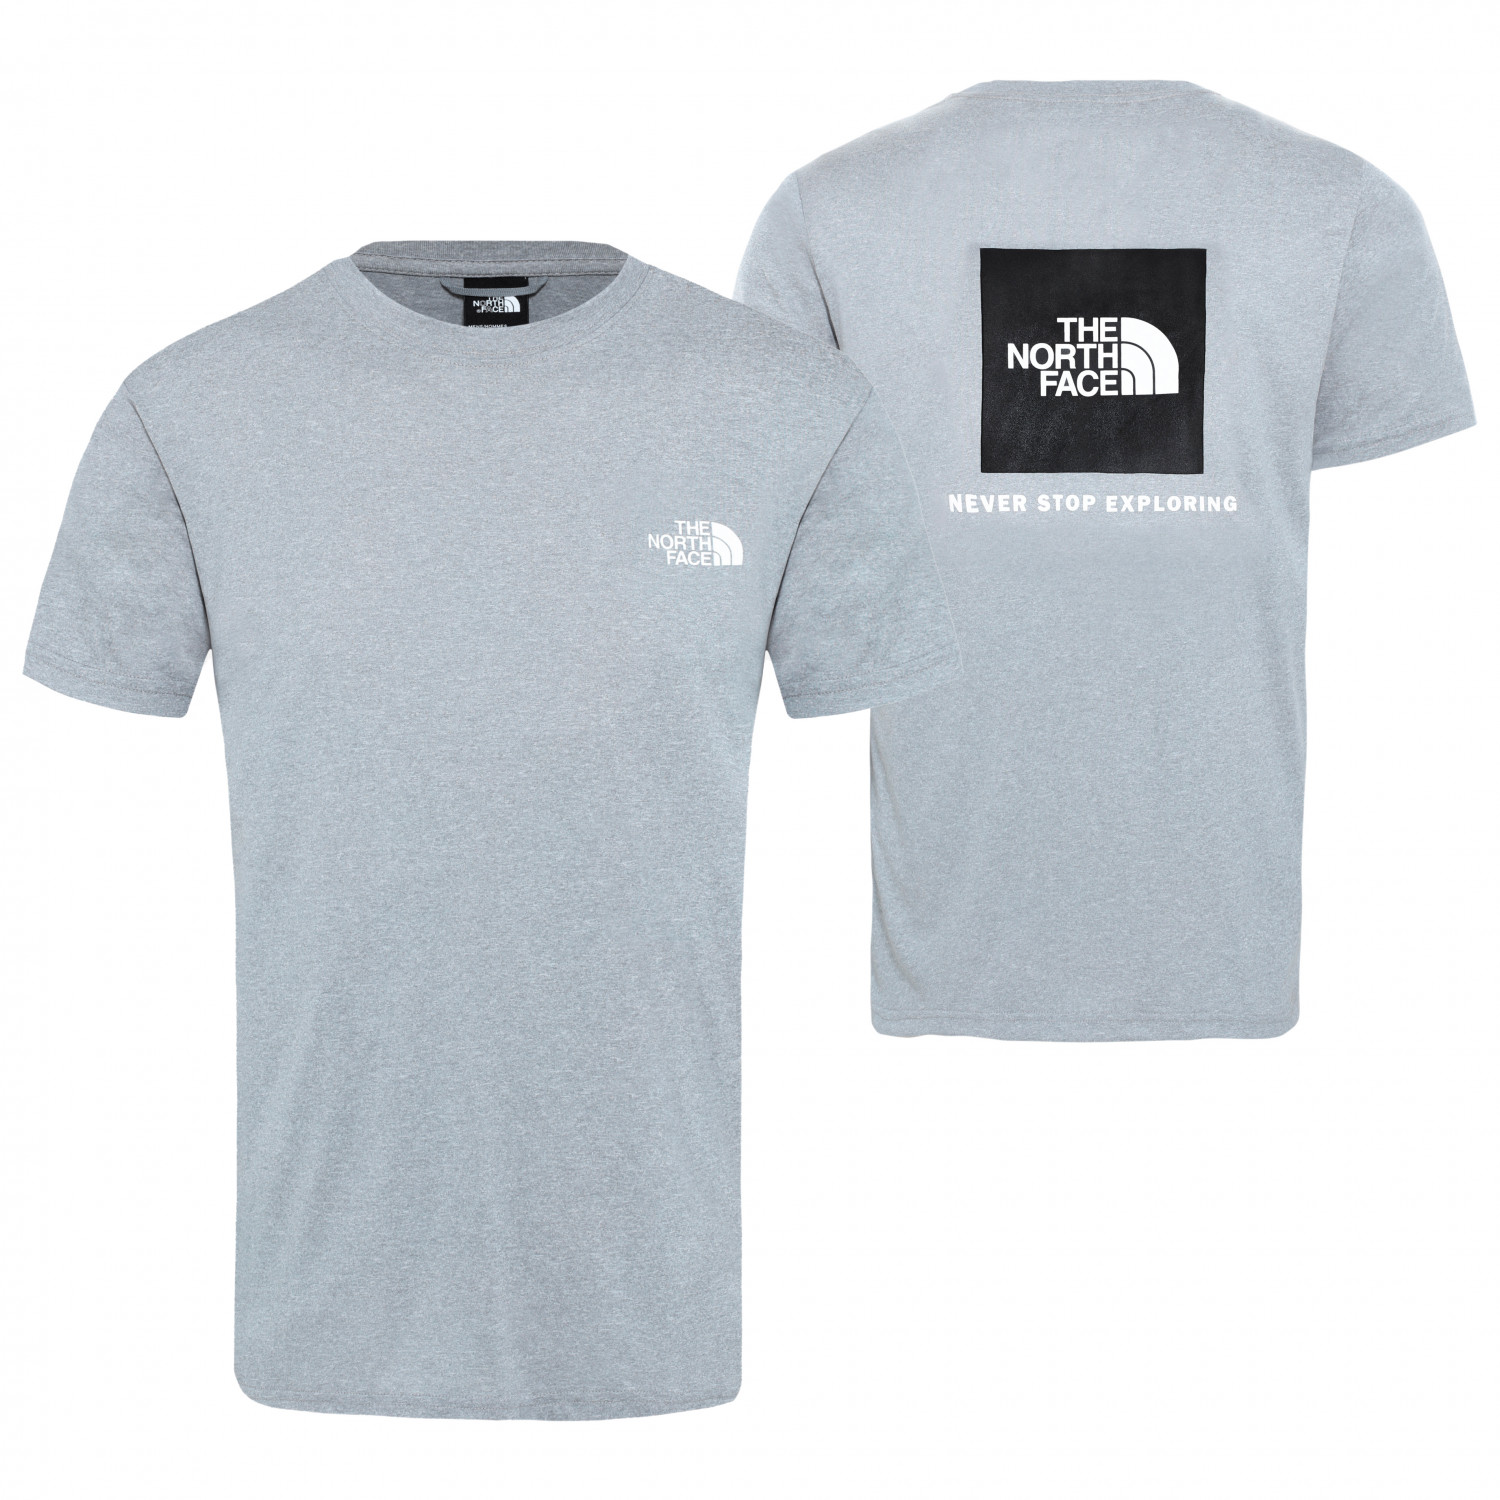 Функциональная рубашка The North Face Reaxion Red Box Tee, цвет Mid Grey Heather stout rex the red box